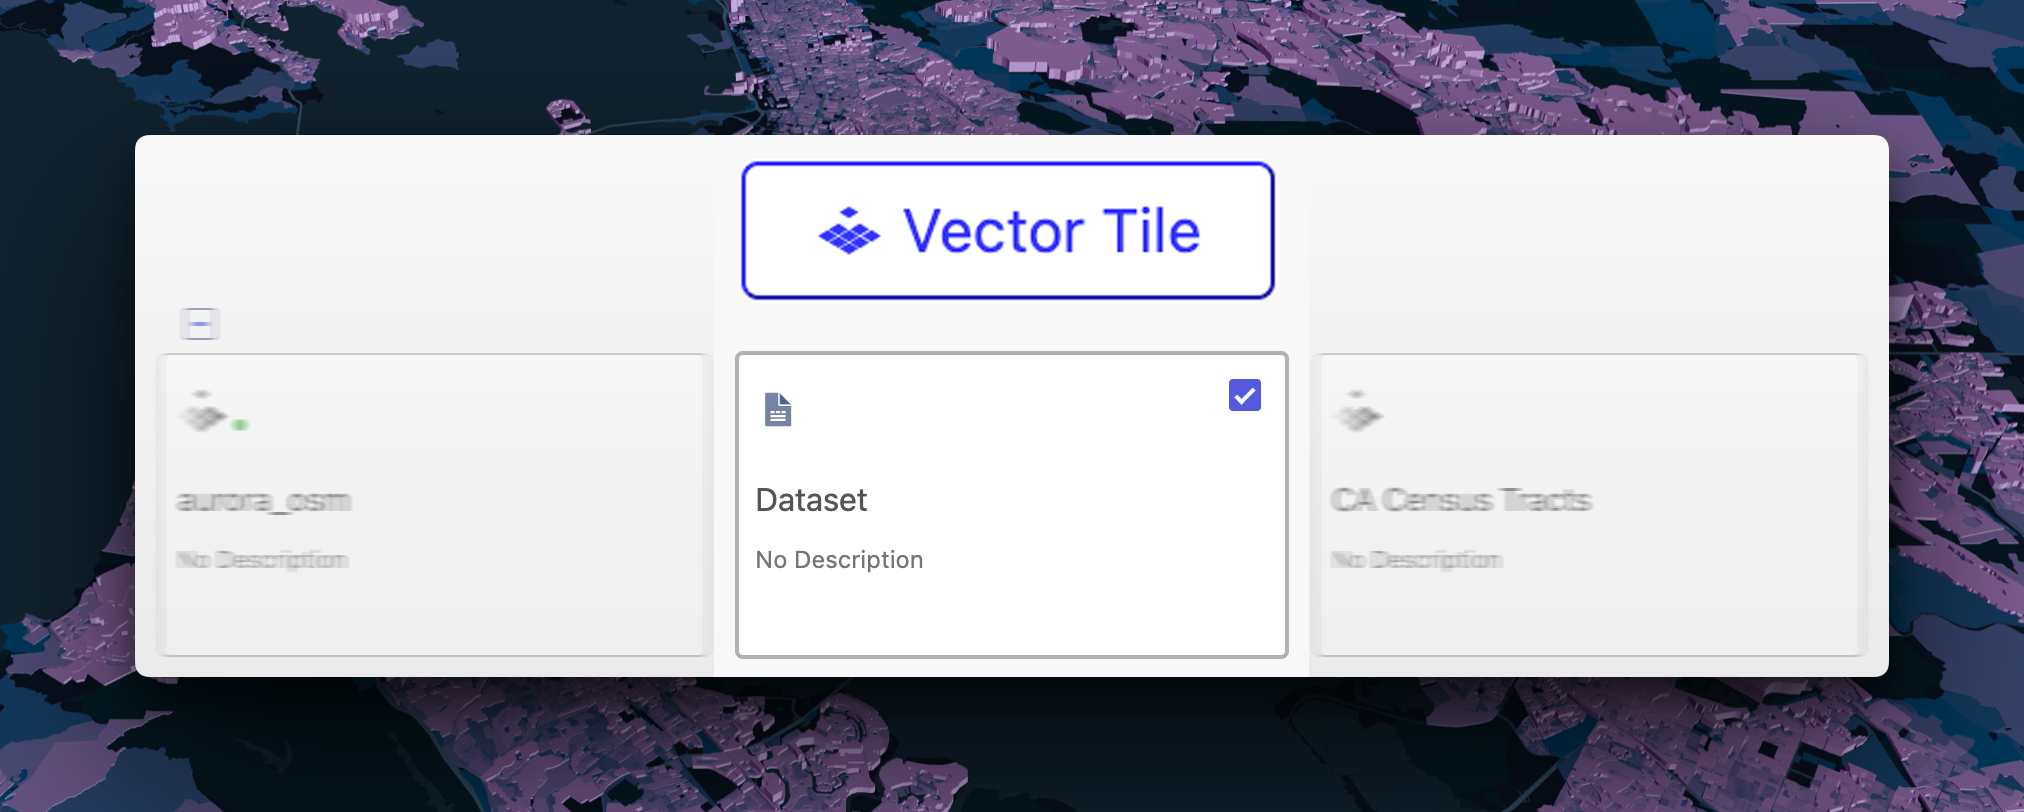 The Vector Tile option now appears when selecting a supported dataset.